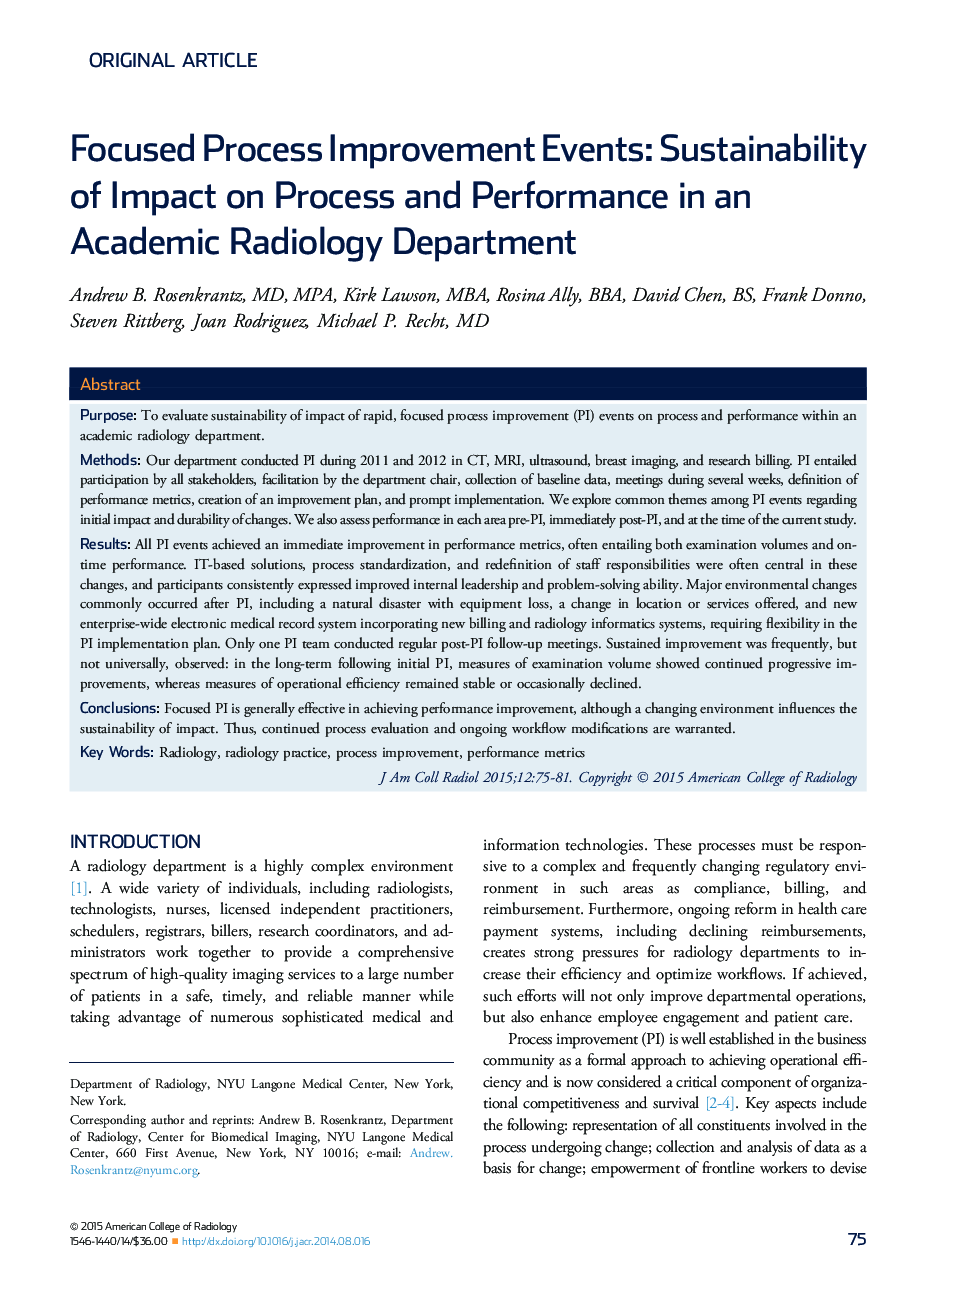 Focused Process Improvement Events: Sustainability of Impact on Process and Performance in an Academic Radiology Department